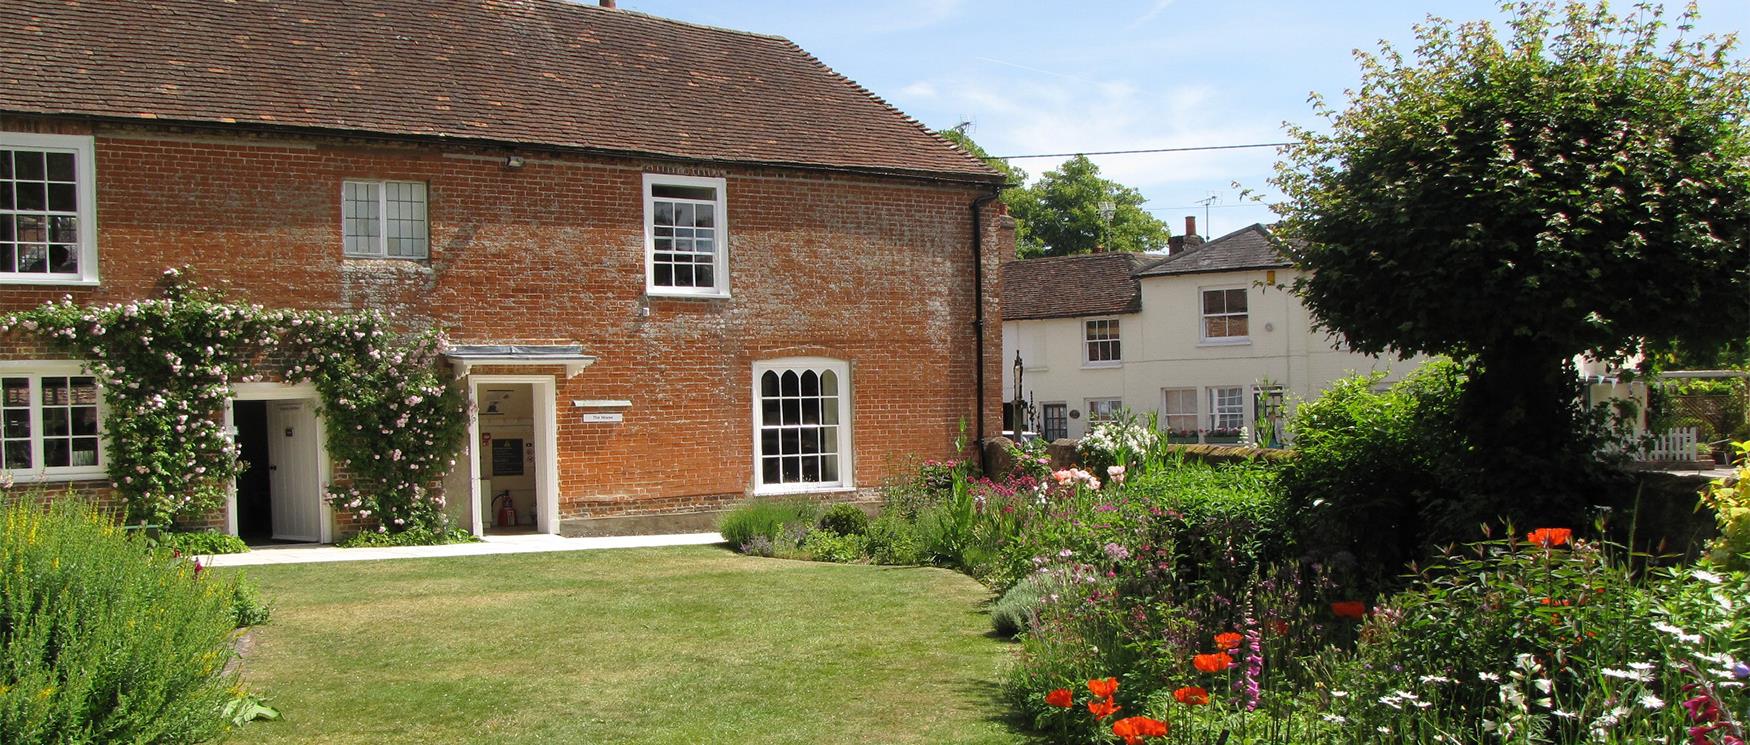 Museums In Hampshire VisitHampshirecouk